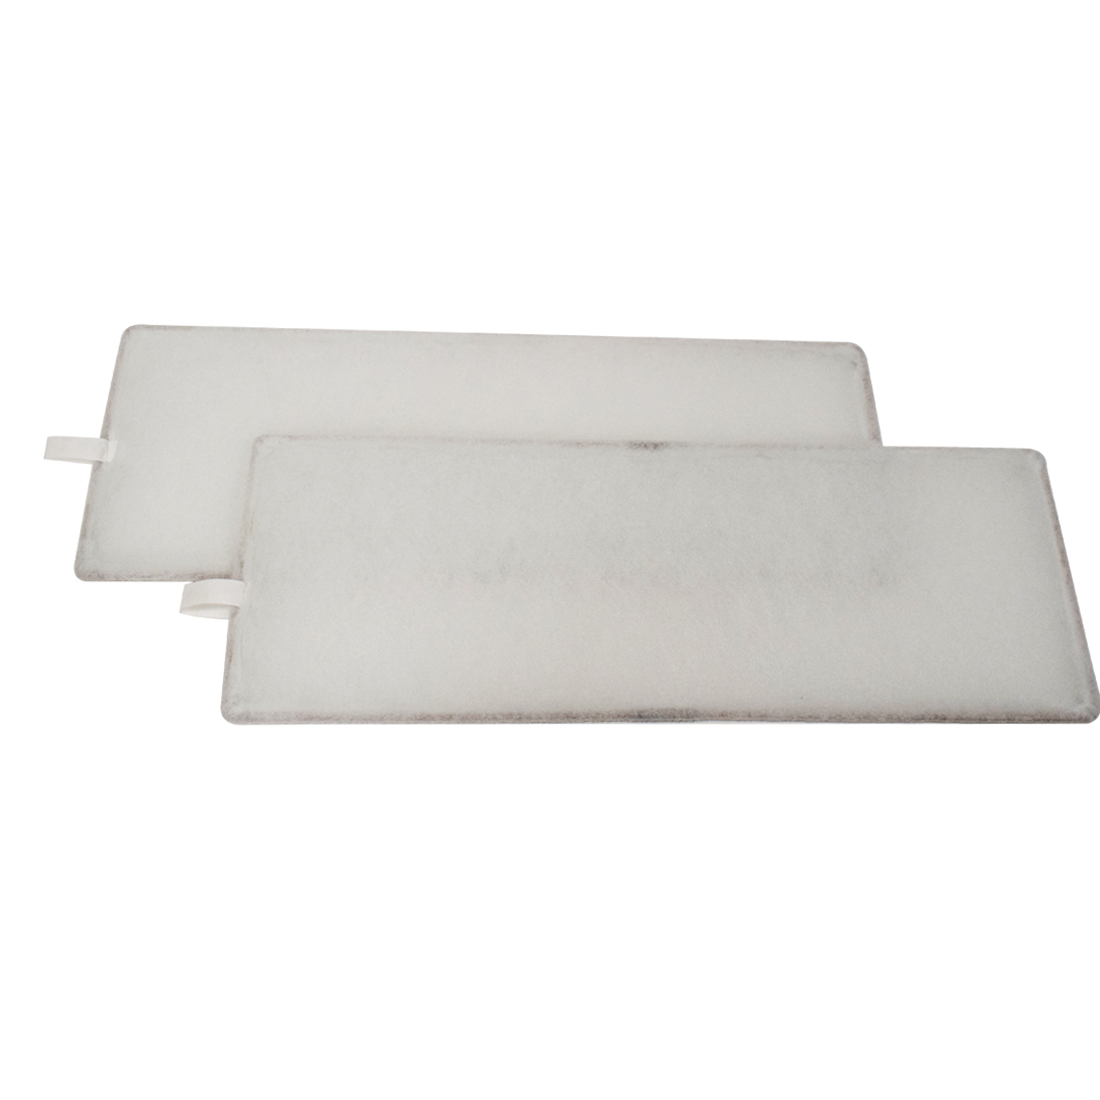 2 x G4 Filters for Vent Axia Plus B / High Flow MVHR